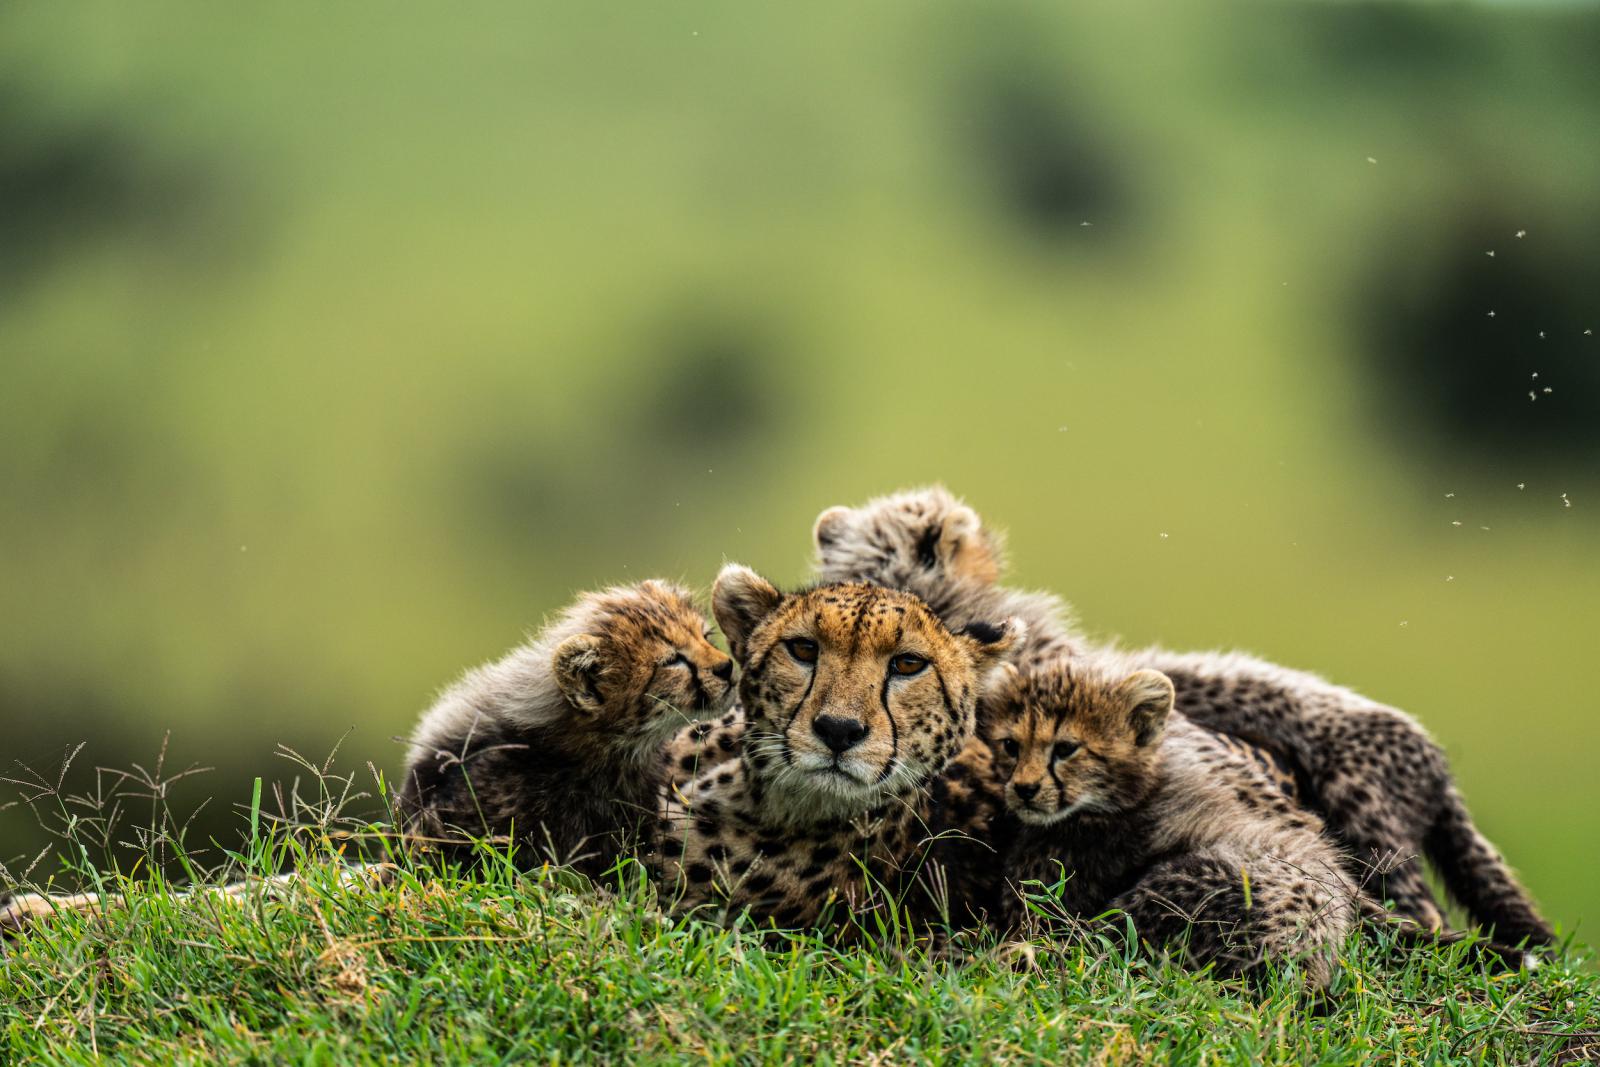 Cheetah, Acinonyx jubatus, cubs resting with their mother.